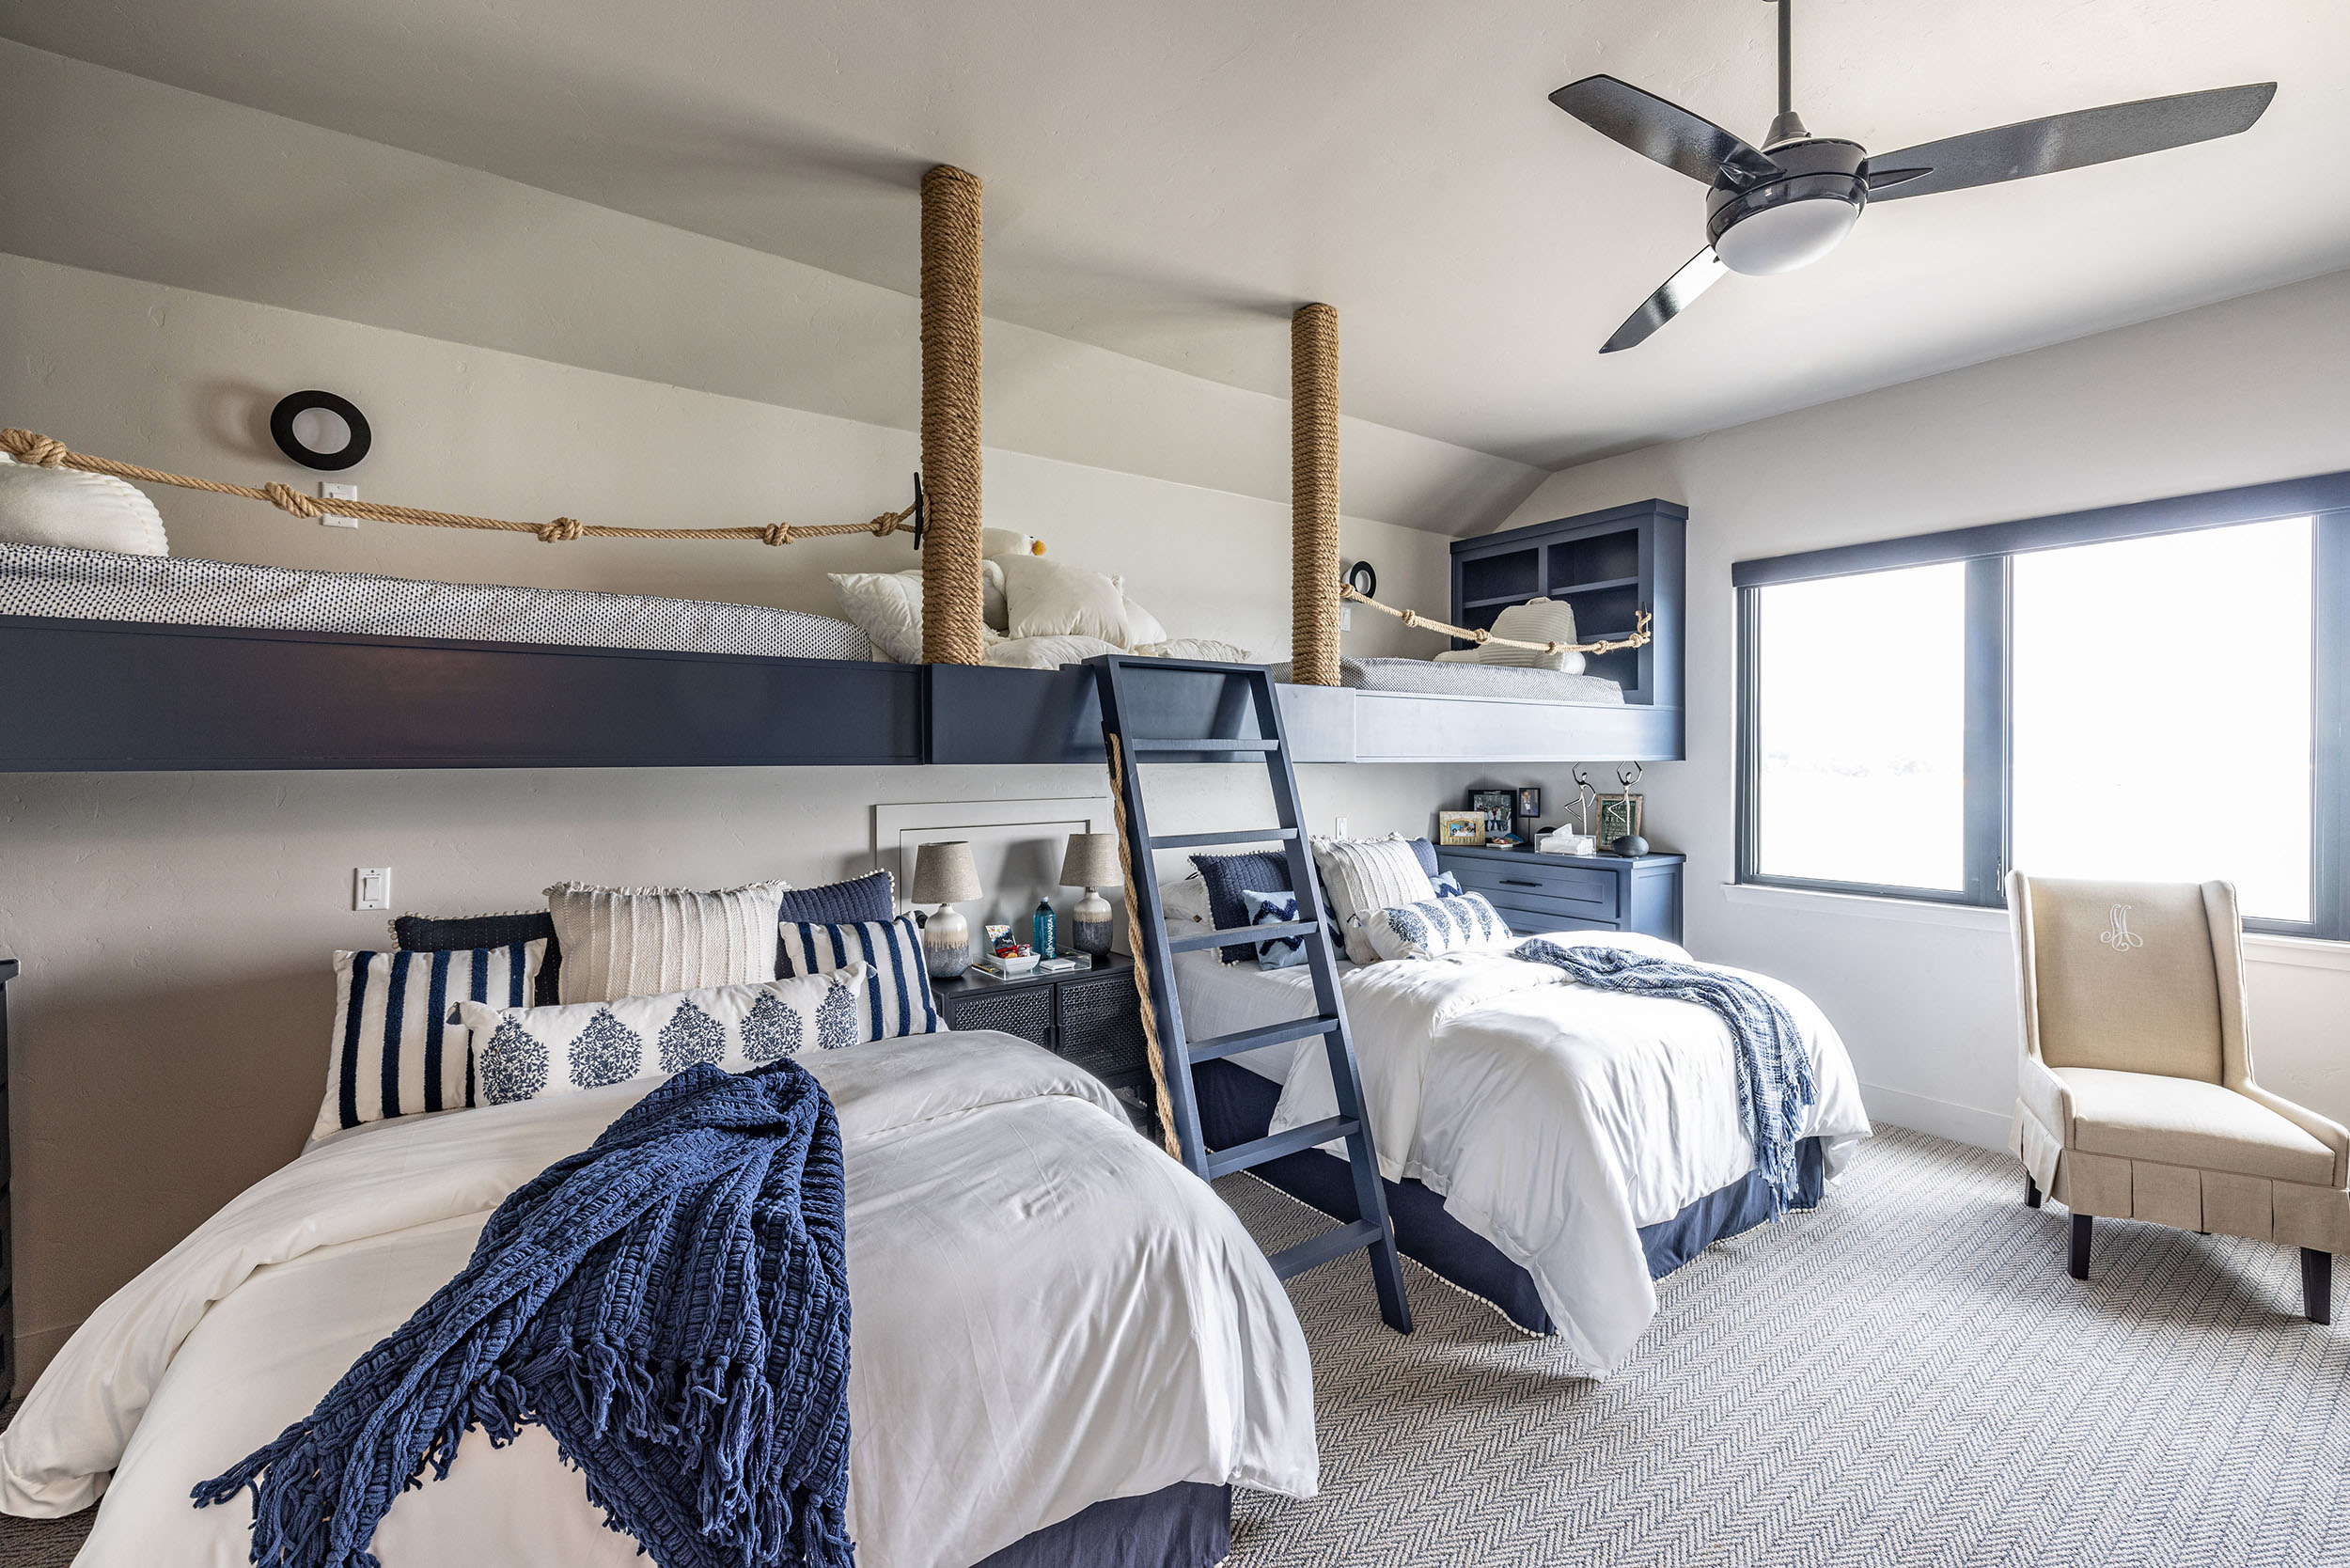 Lake house_Grandkids room with loft bed and overstuffed fluffy bedding and play area in nautical theme second home vacation property in Possum Kingdom Lake Texas